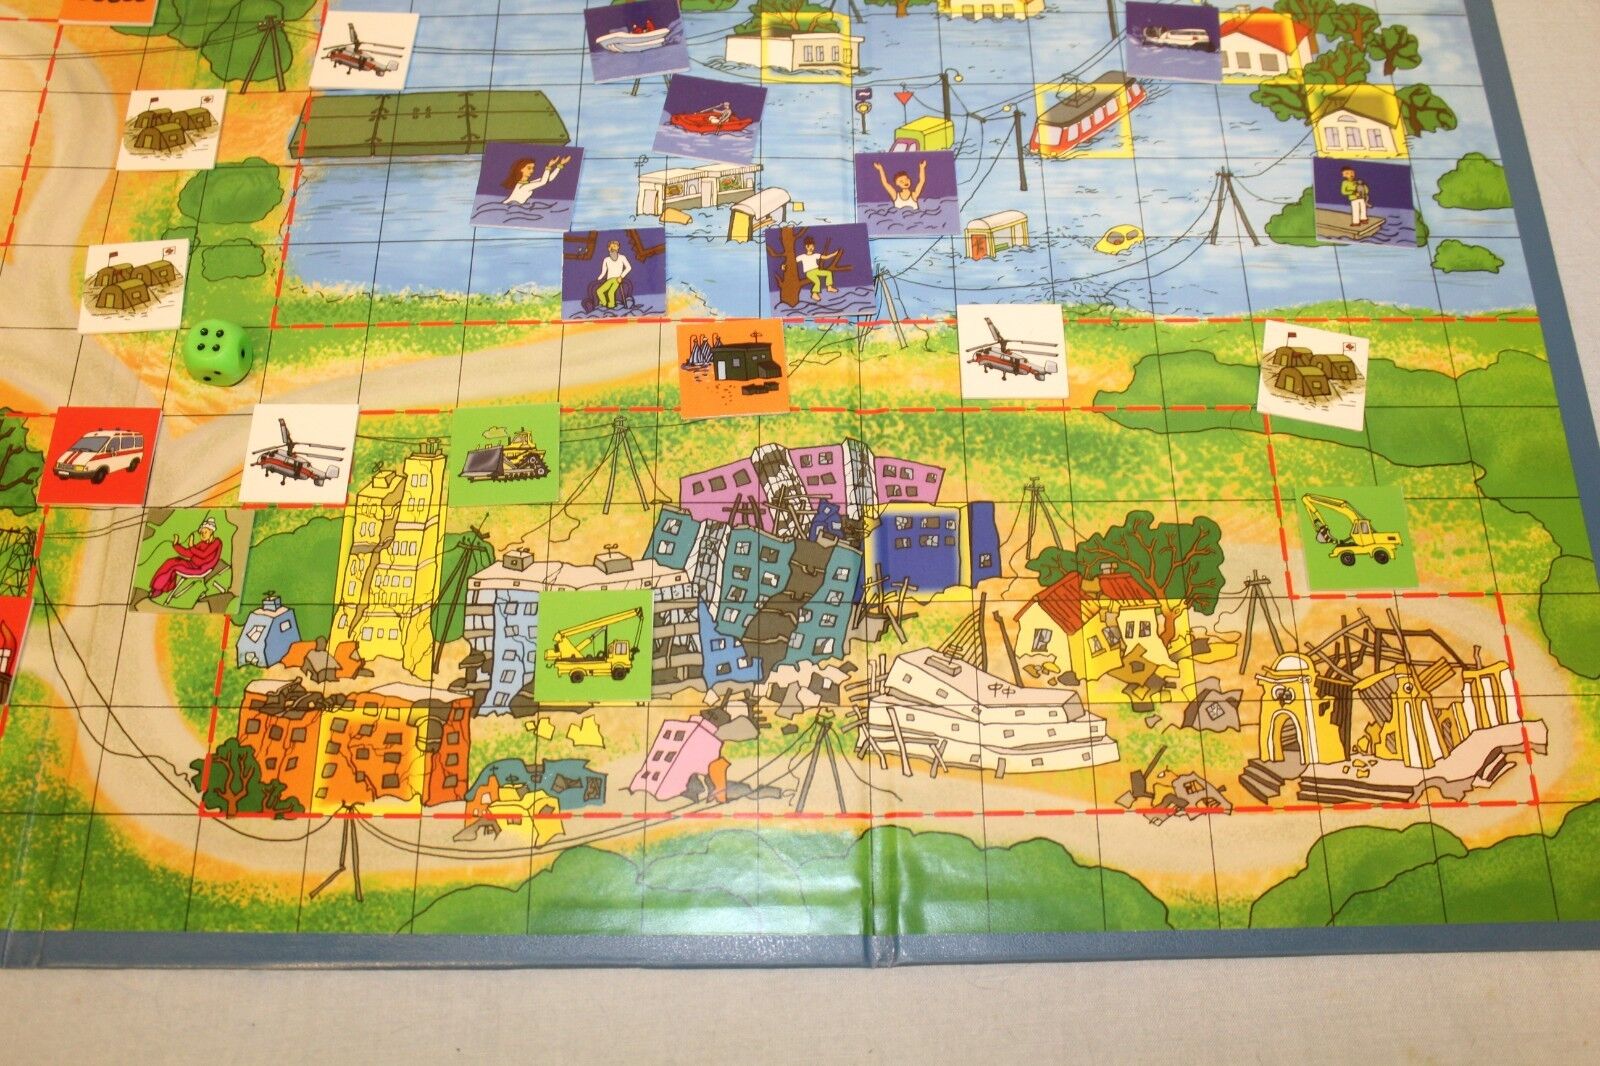 11429.Russian Board Game: I am a Rescuer. For children 9 years and older